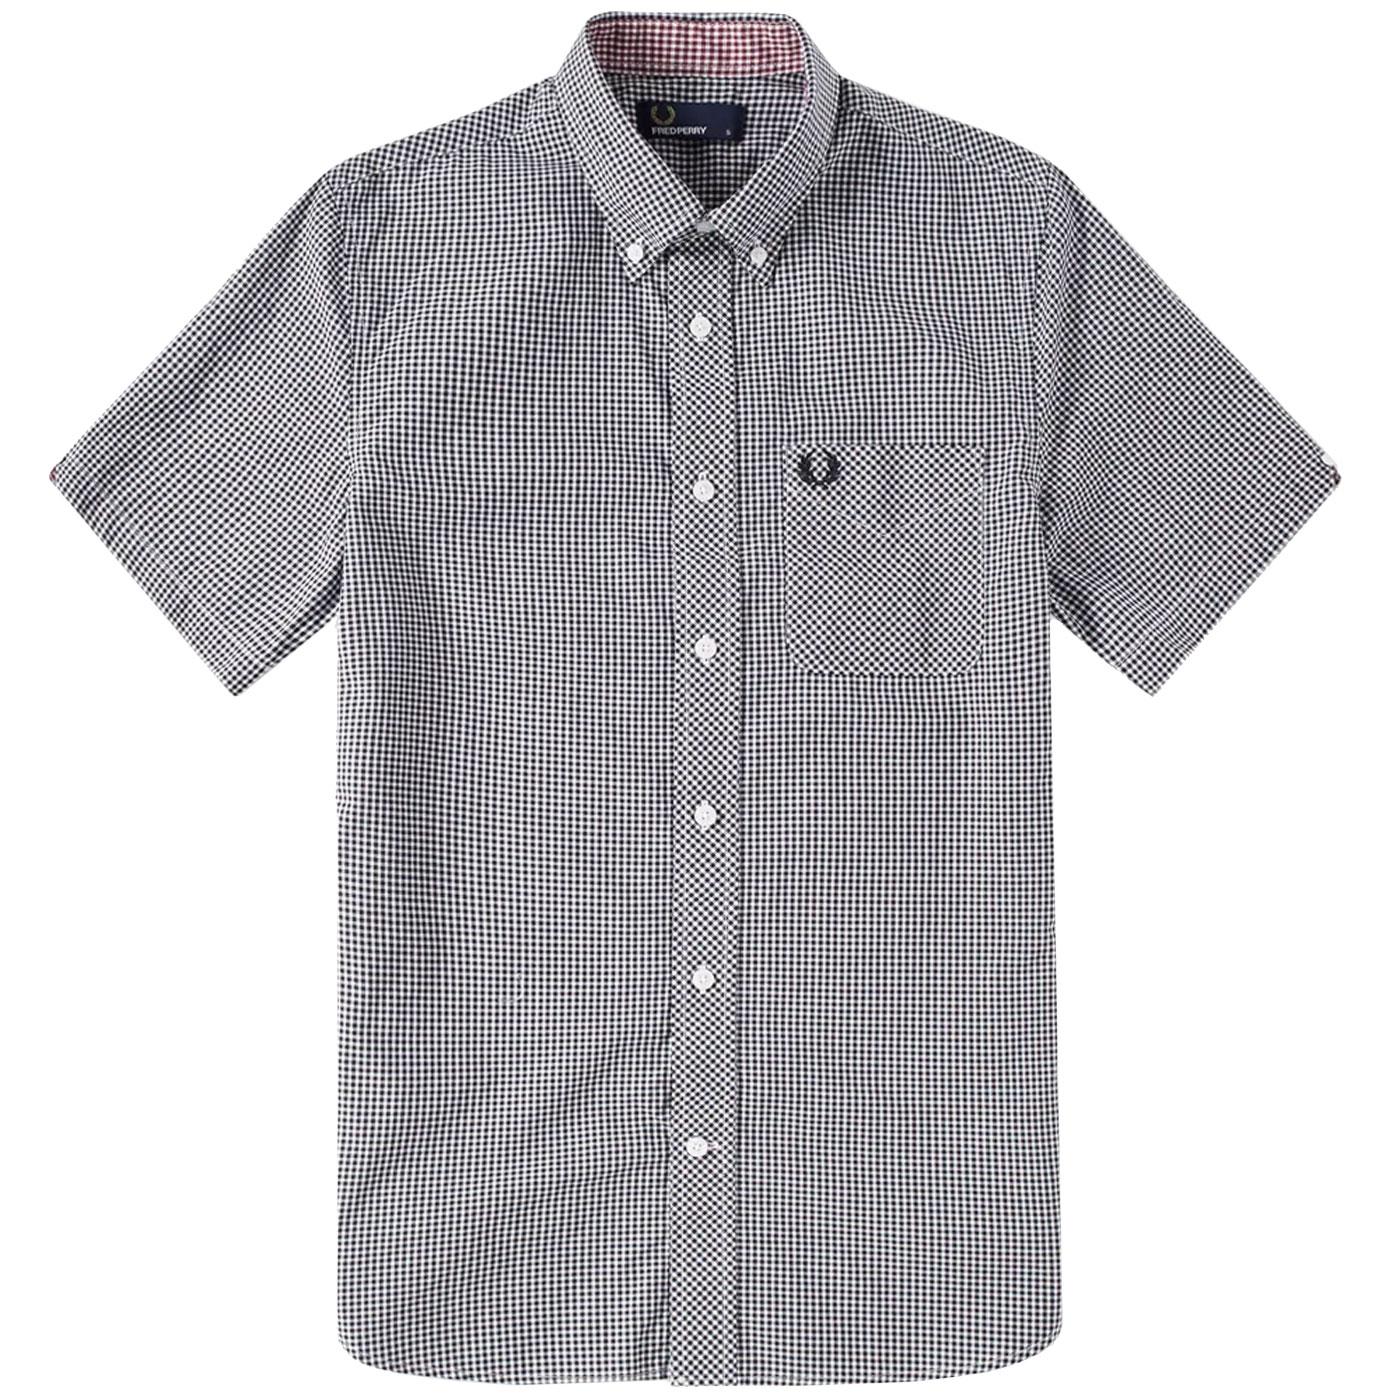 FRED PERRY Mens Retro Mod S/S Gingham Check Shirt in Black